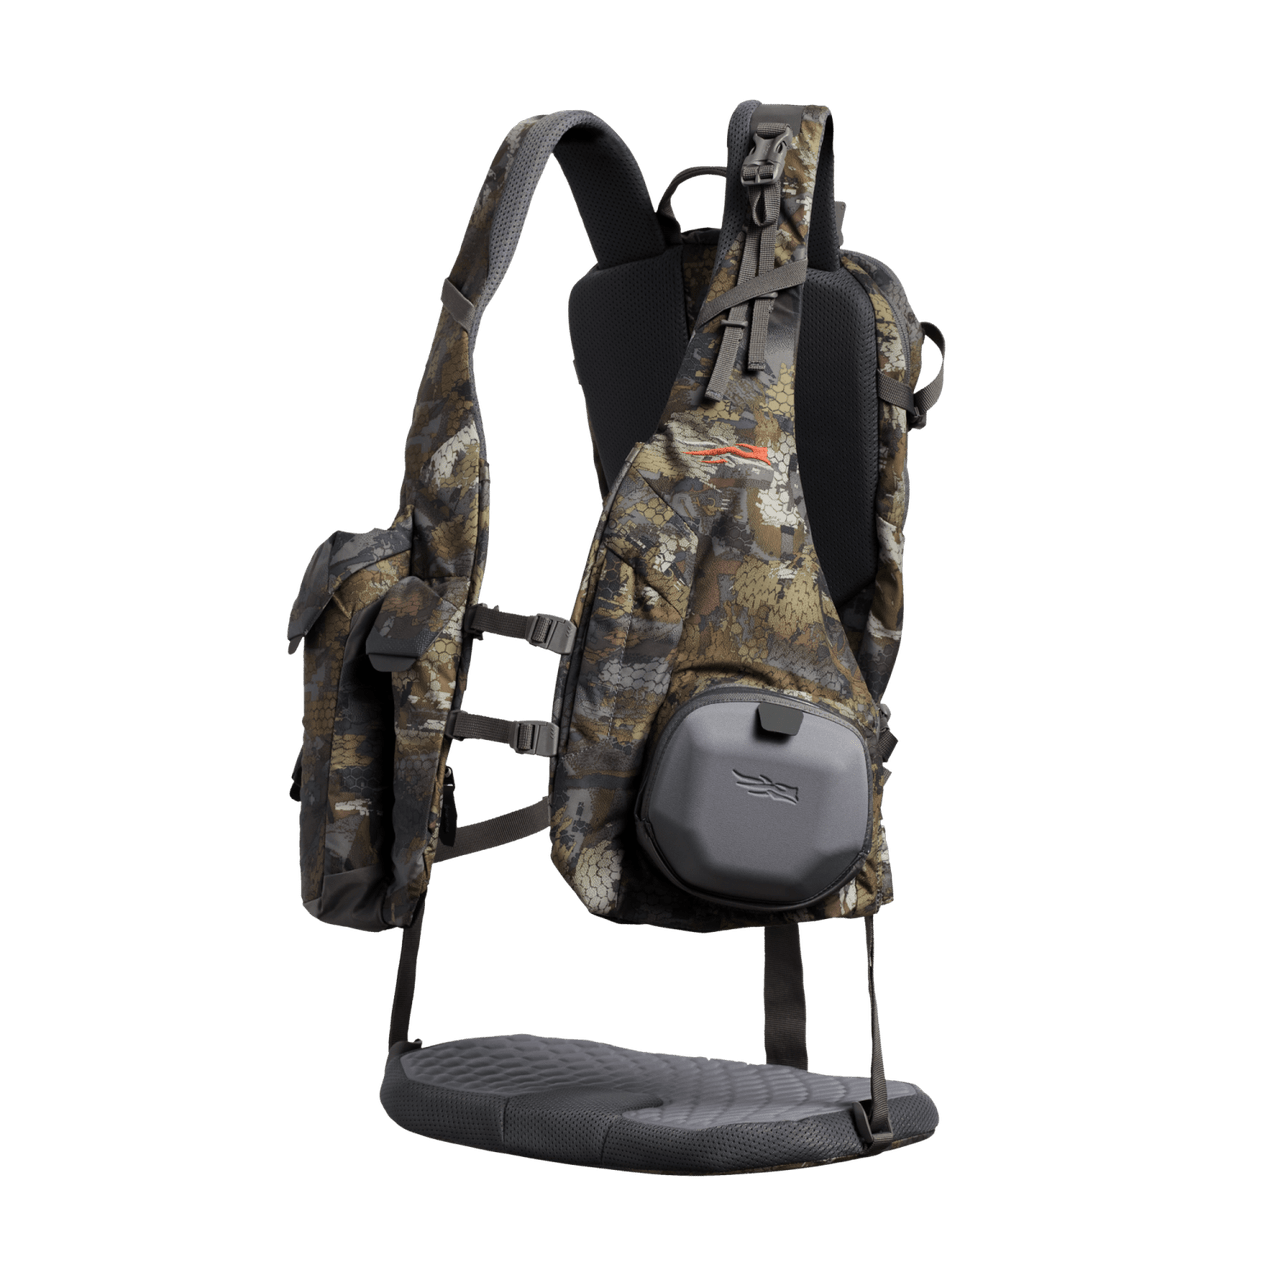 Turkey Vest with Seat Cushion, Turkey Hunting Vest with Game Pouch, Hunting  Clothes for Men Women Adjustable2.0 - China Hunting Vest, Tactical Vest  Plate Carrier